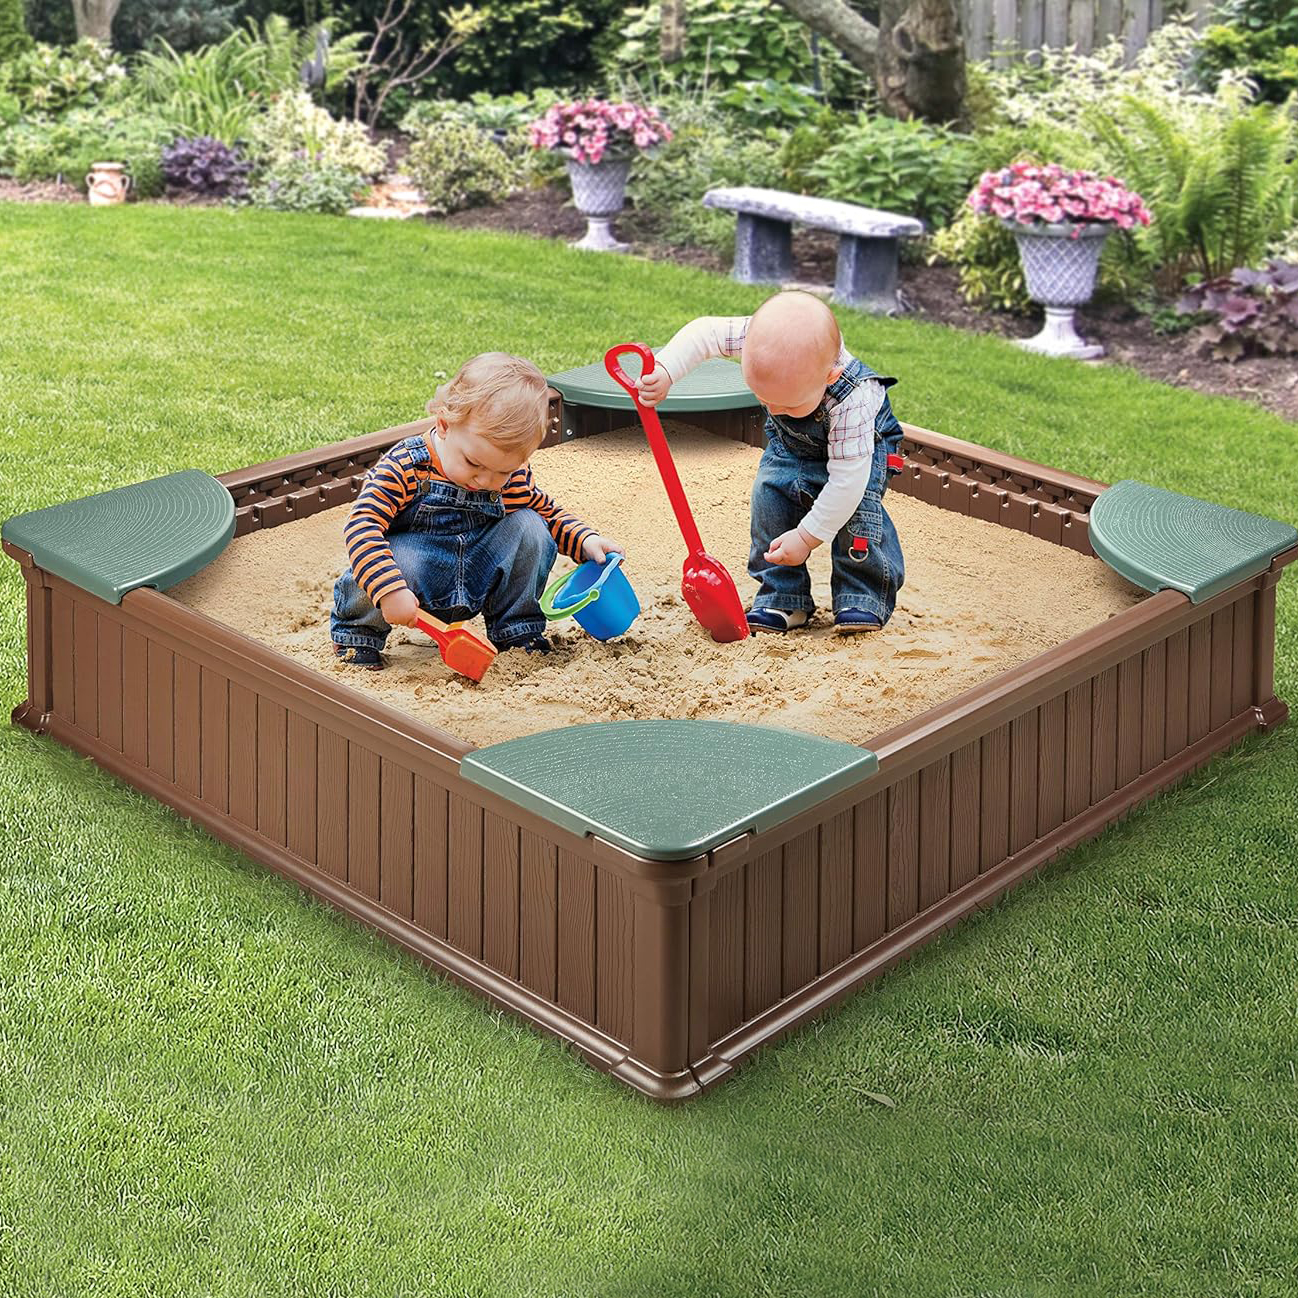 fun outdoor toys for kids - sand box